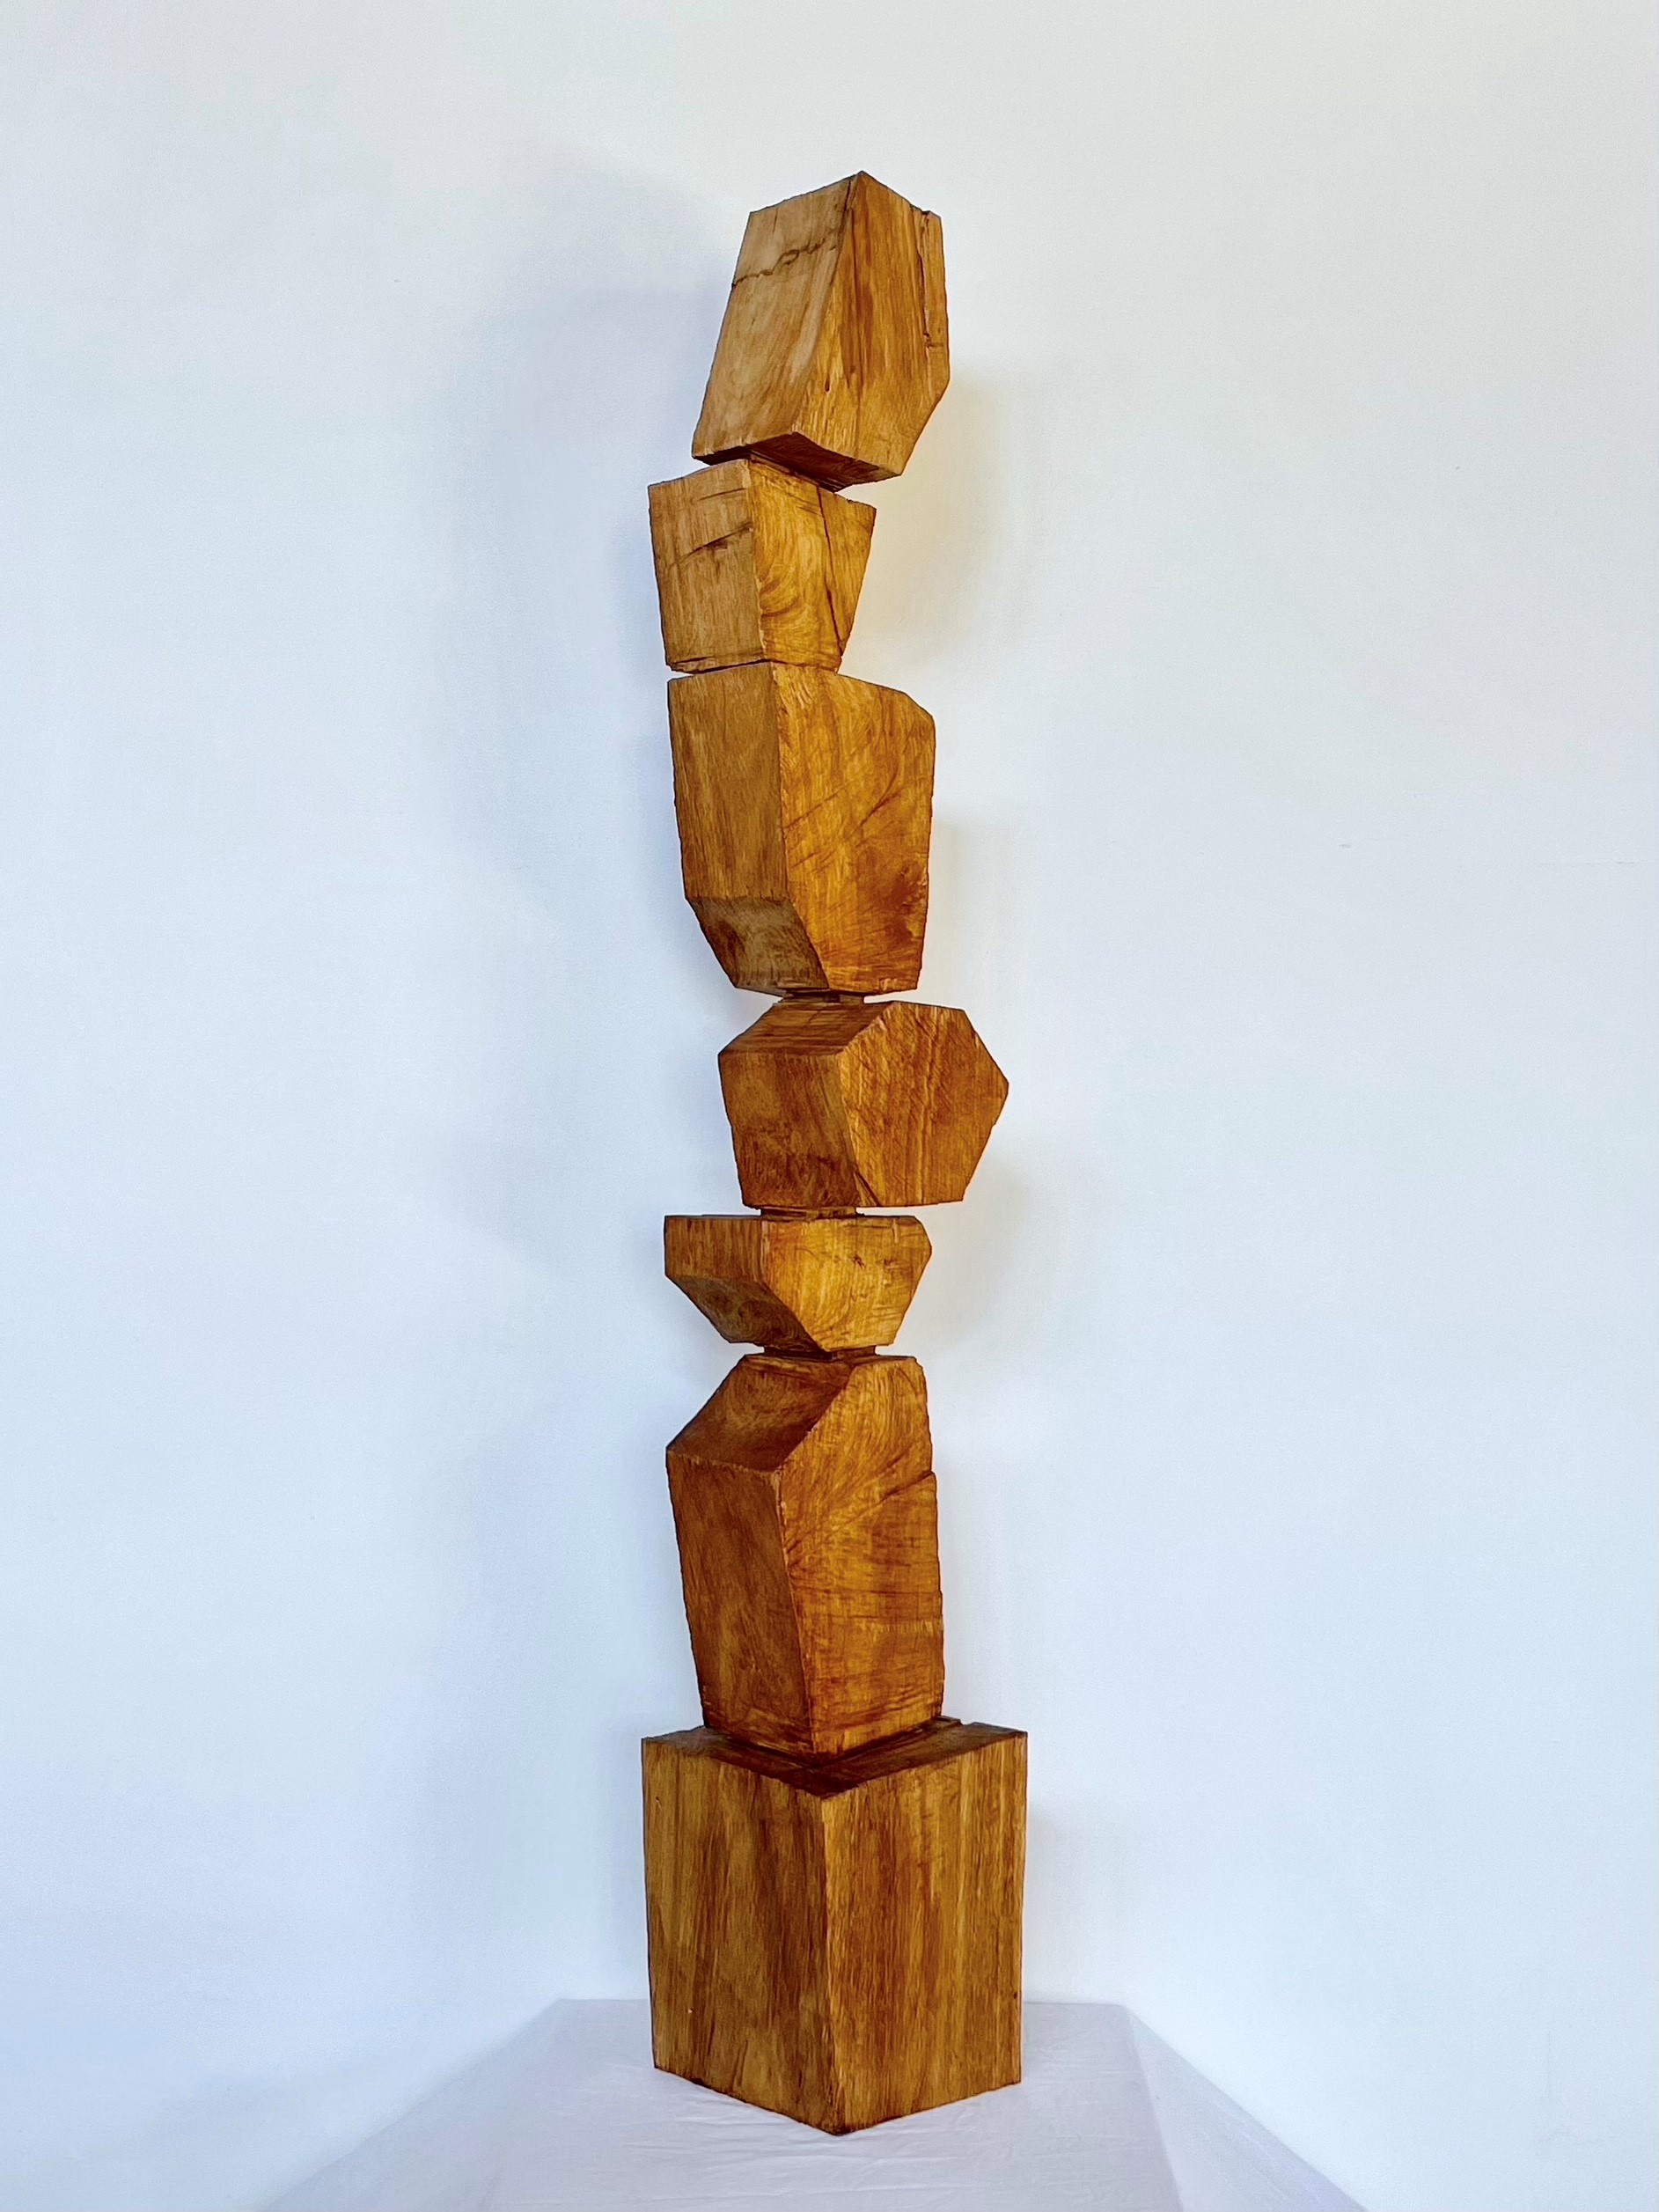 Timber sculpture of asymetric shapes stacked on top of each other to form a trophy